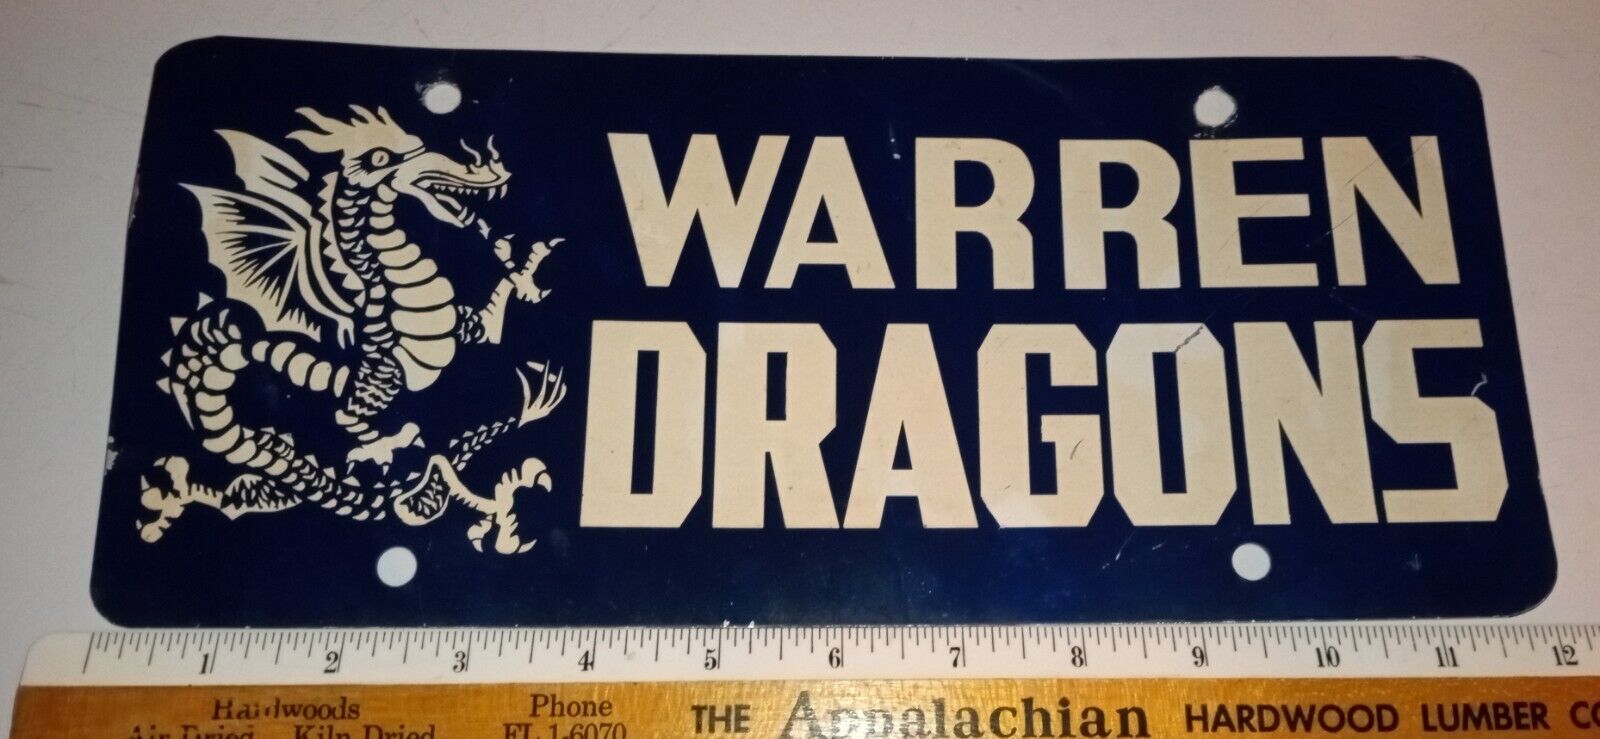 Old 1960s Pennsylvania Car License Plate Warren PA Dragons Booster License Plate